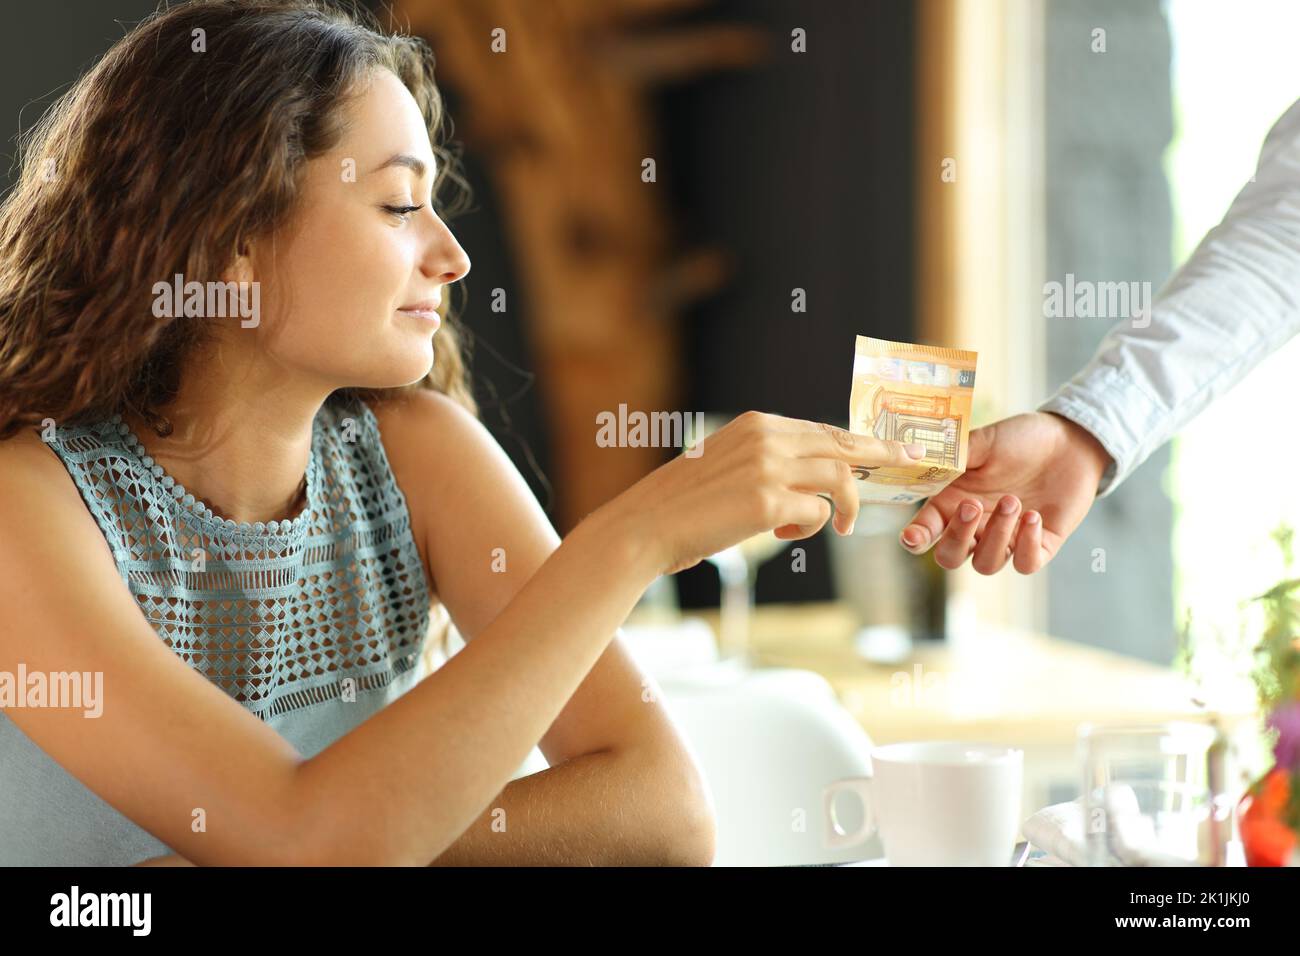 Woman in a restaurant paying to a waiter with a paper bill Stock Photo